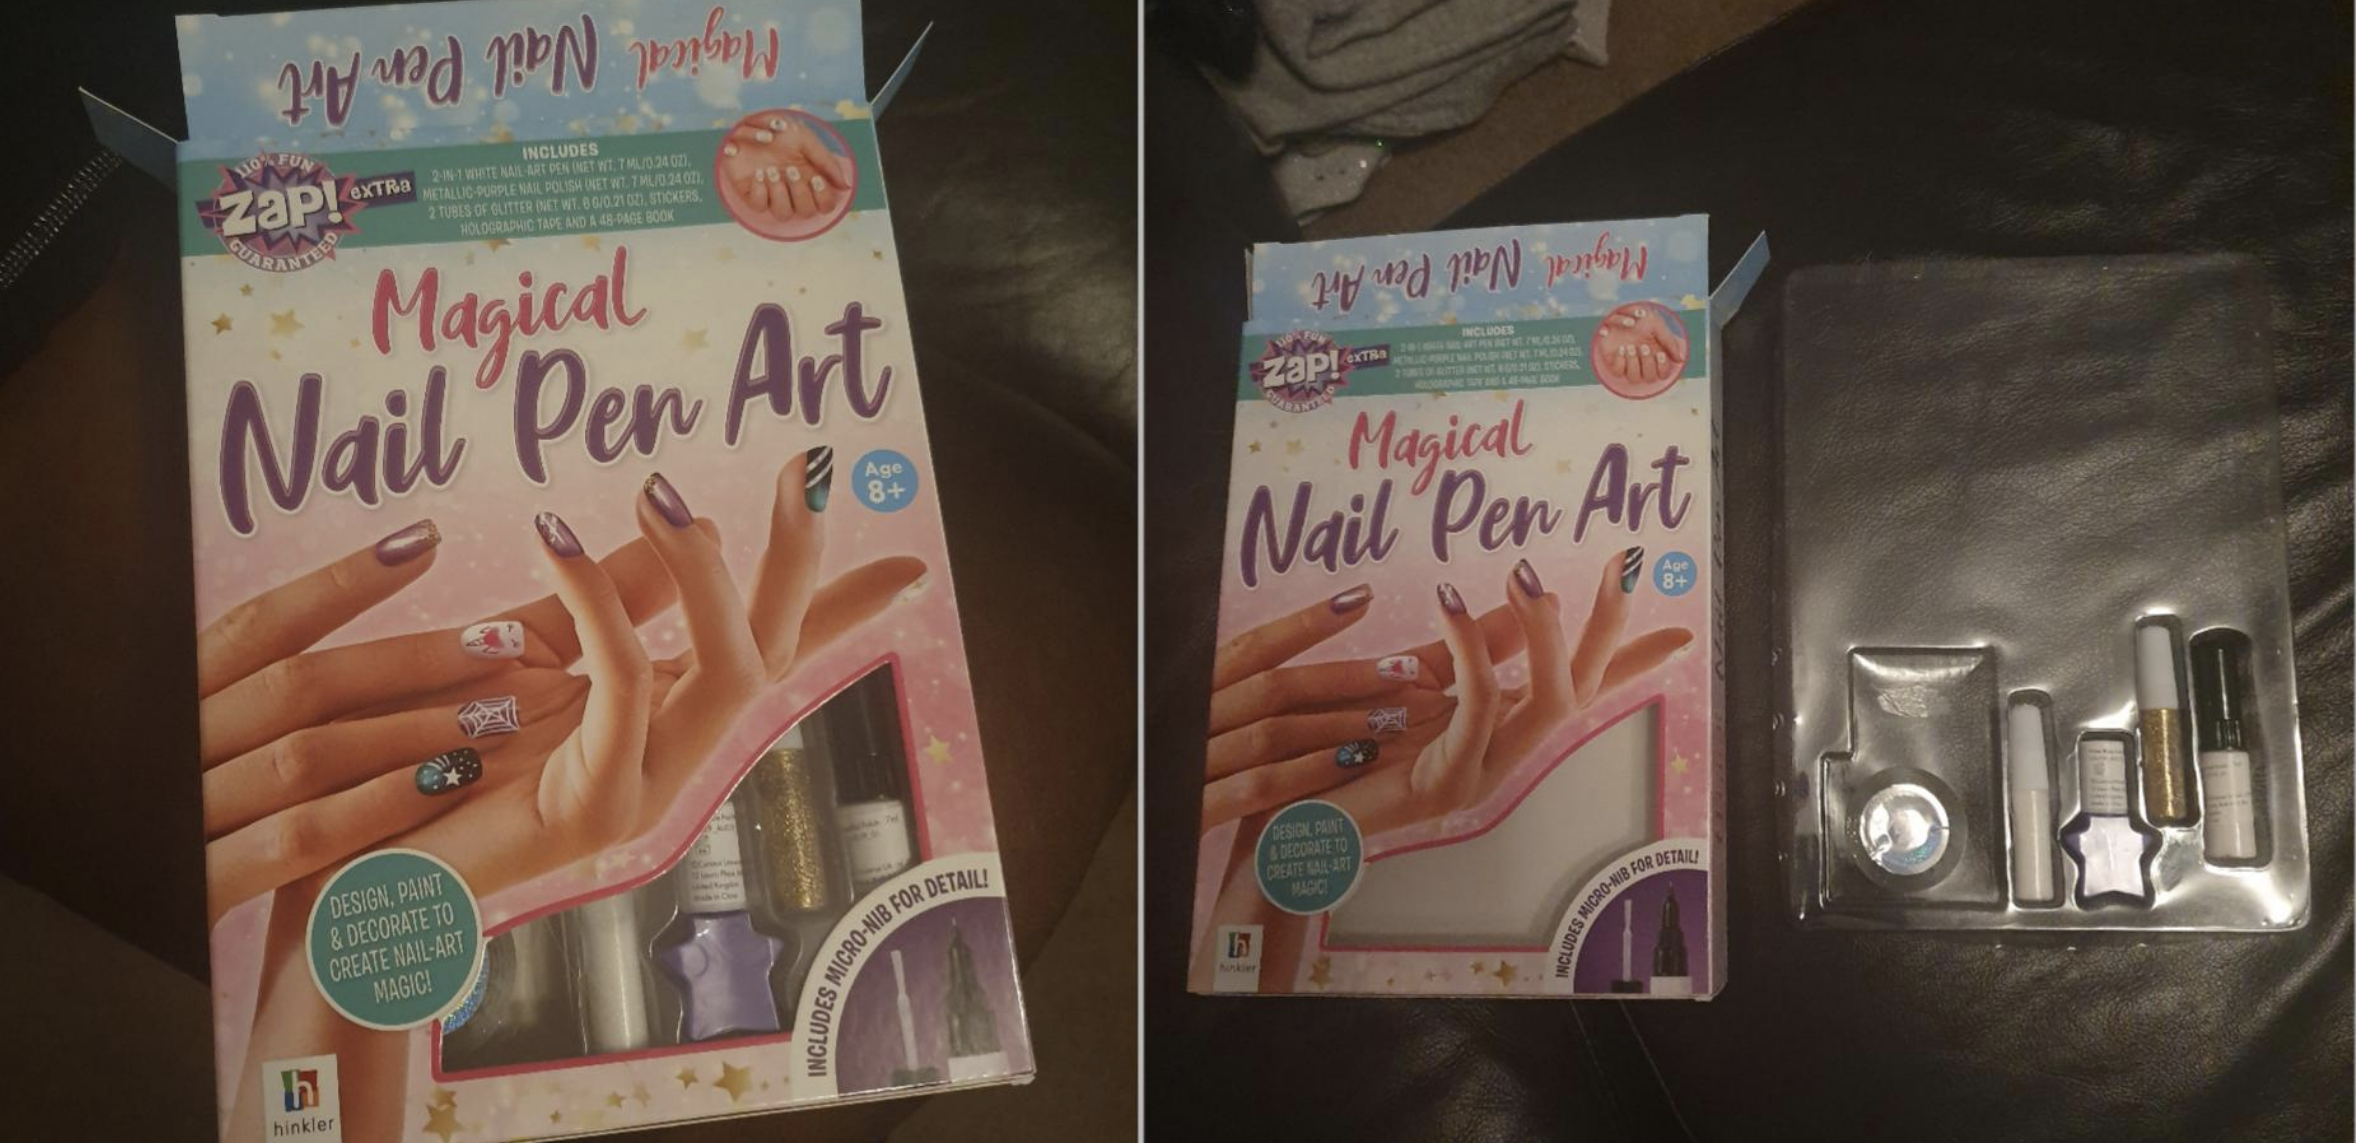 A large &quot;Magical Nail Pen Art&quot; kit that contains just a few polishes that were visible on the cover